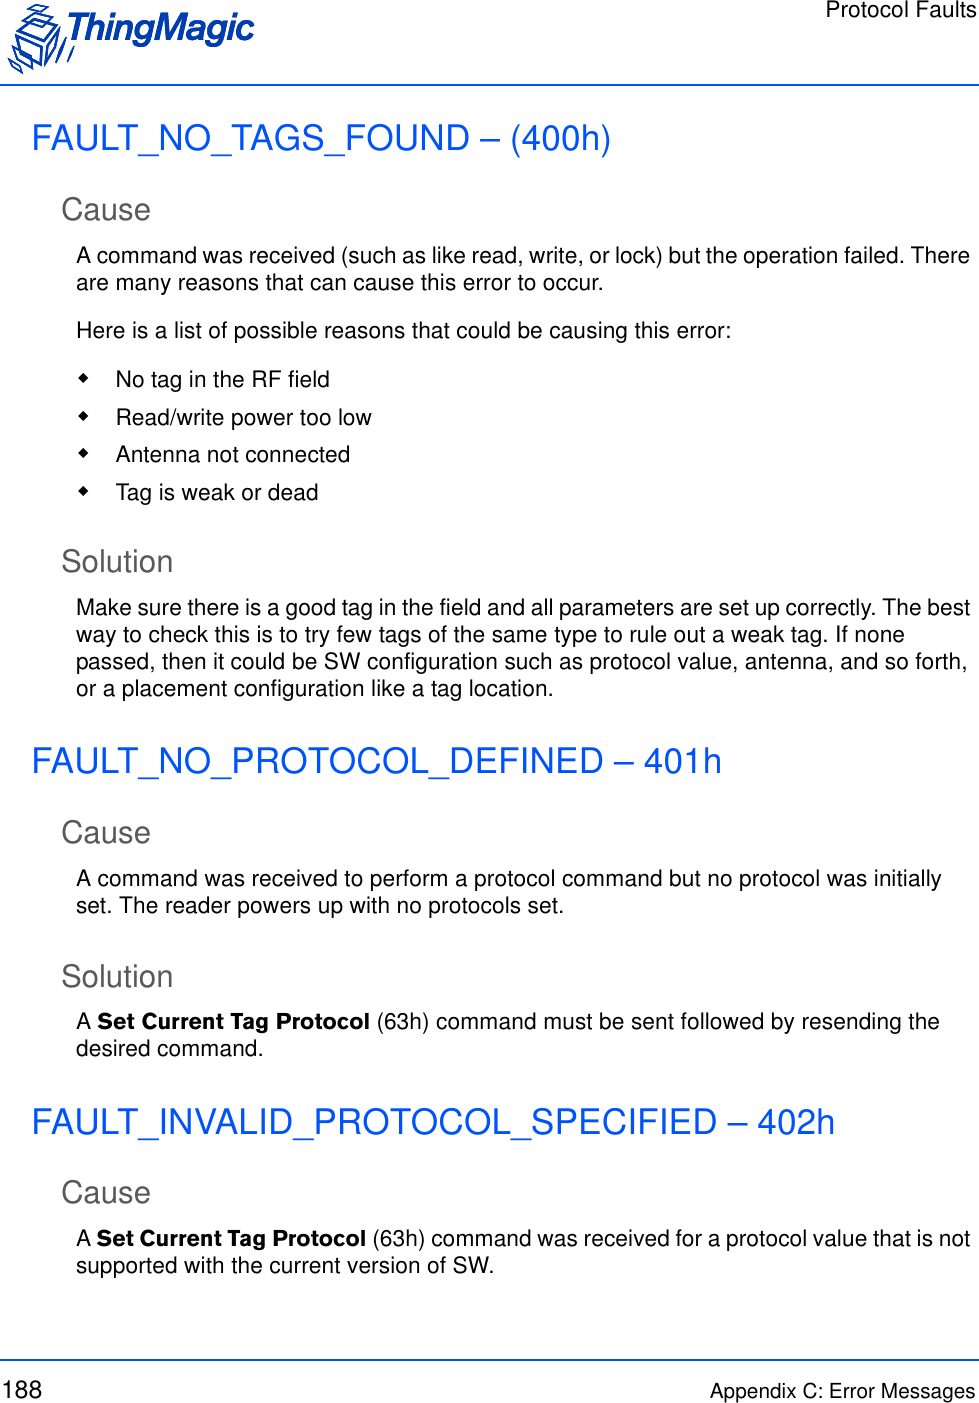 Protocol Faults188 Appendix C: Error MessagesFAULT_NO_TAGS_FOUND – (400h)CauseA command was received (such as like read, write, or lock) but the operation failed. There are many reasons that can cause this error to occur. Here is a list of possible reasons that could be causing this error:  No tag in the RF field Read/write power too low Antenna not connected Tag is weak or deadSolutionMake sure there is a good tag in the field and all parameters are set up correctly. The best way to check this is to try few tags of the same type to rule out a weak tag. If none passed, then it could be SW configuration such as protocol value, antenna, and so forth, or a placement configuration like a tag location.FAULT_NO_PROTOCOL_DEFINED – 401hCauseA command was received to perform a protocol command but no protocol was initially set. The reader powers up with no protocols set.SolutionA Set Current Tag Protocol (63h) command must be sent followed by resending the desired command.FAULT_INVALID_PROTOCOL_SPECIFIED – 402hCauseA Set Current Tag Protocol (63h) command was received for a protocol value that is not supported with the current version of SW.